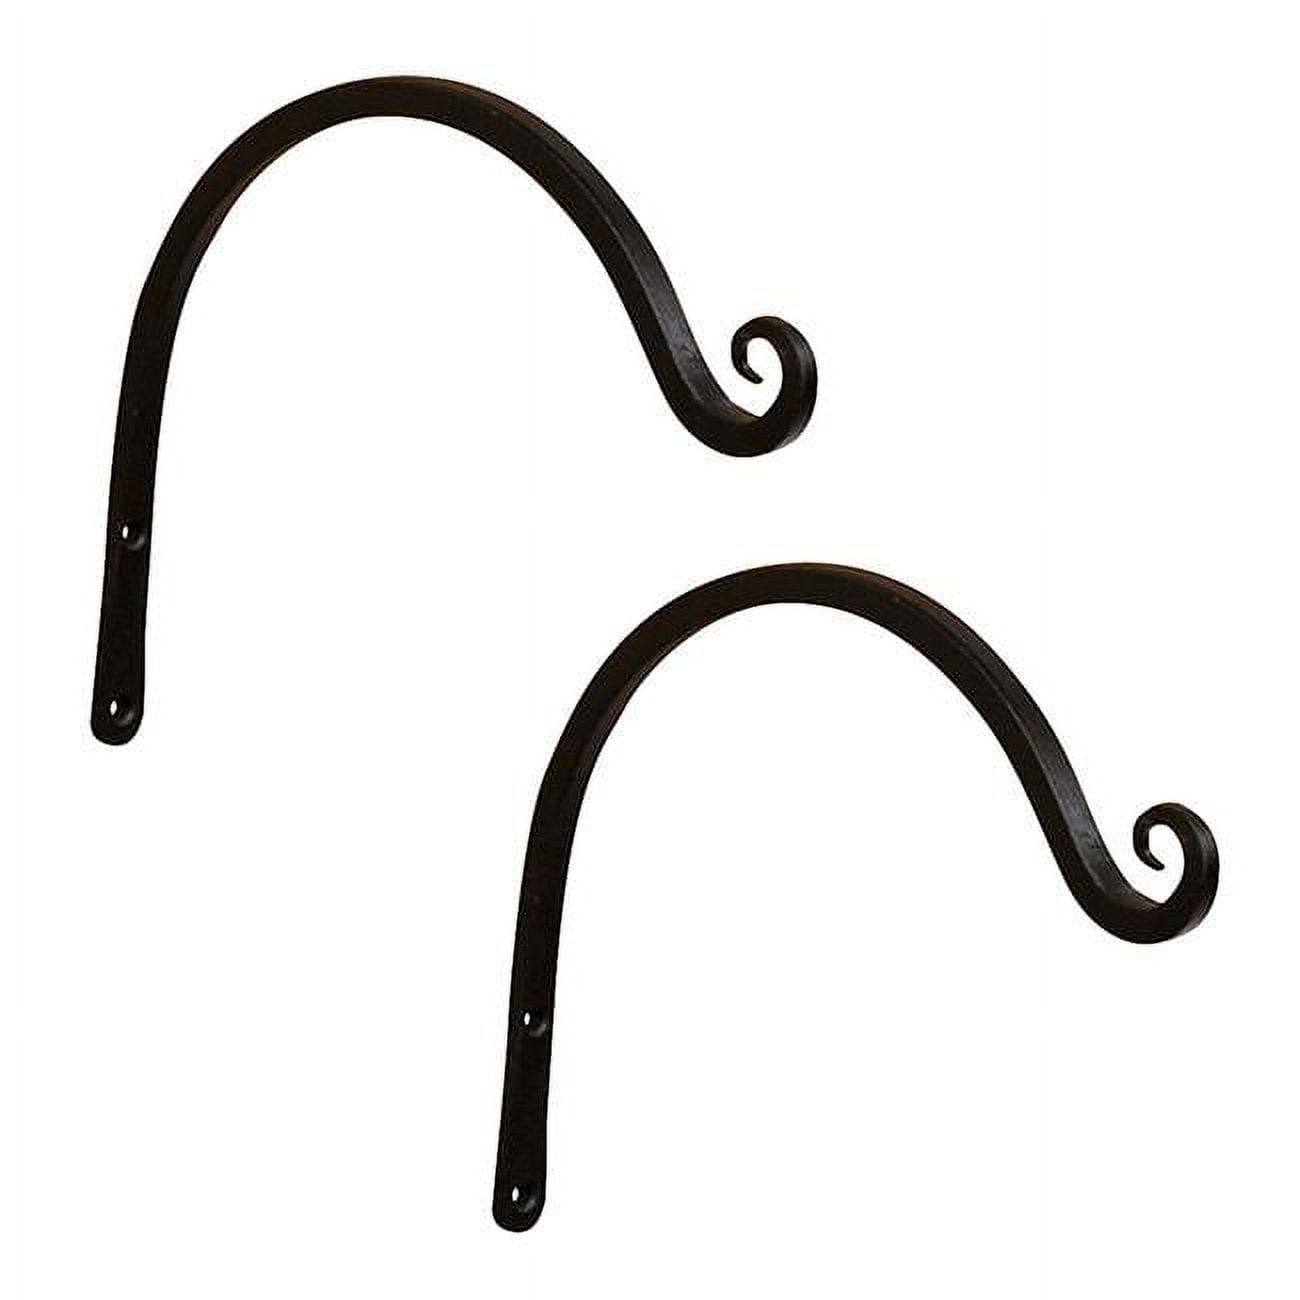 Picture of ACHLA Designs TSH-04-2 8 in. Upcurled Bracket, Black - Pack of 2